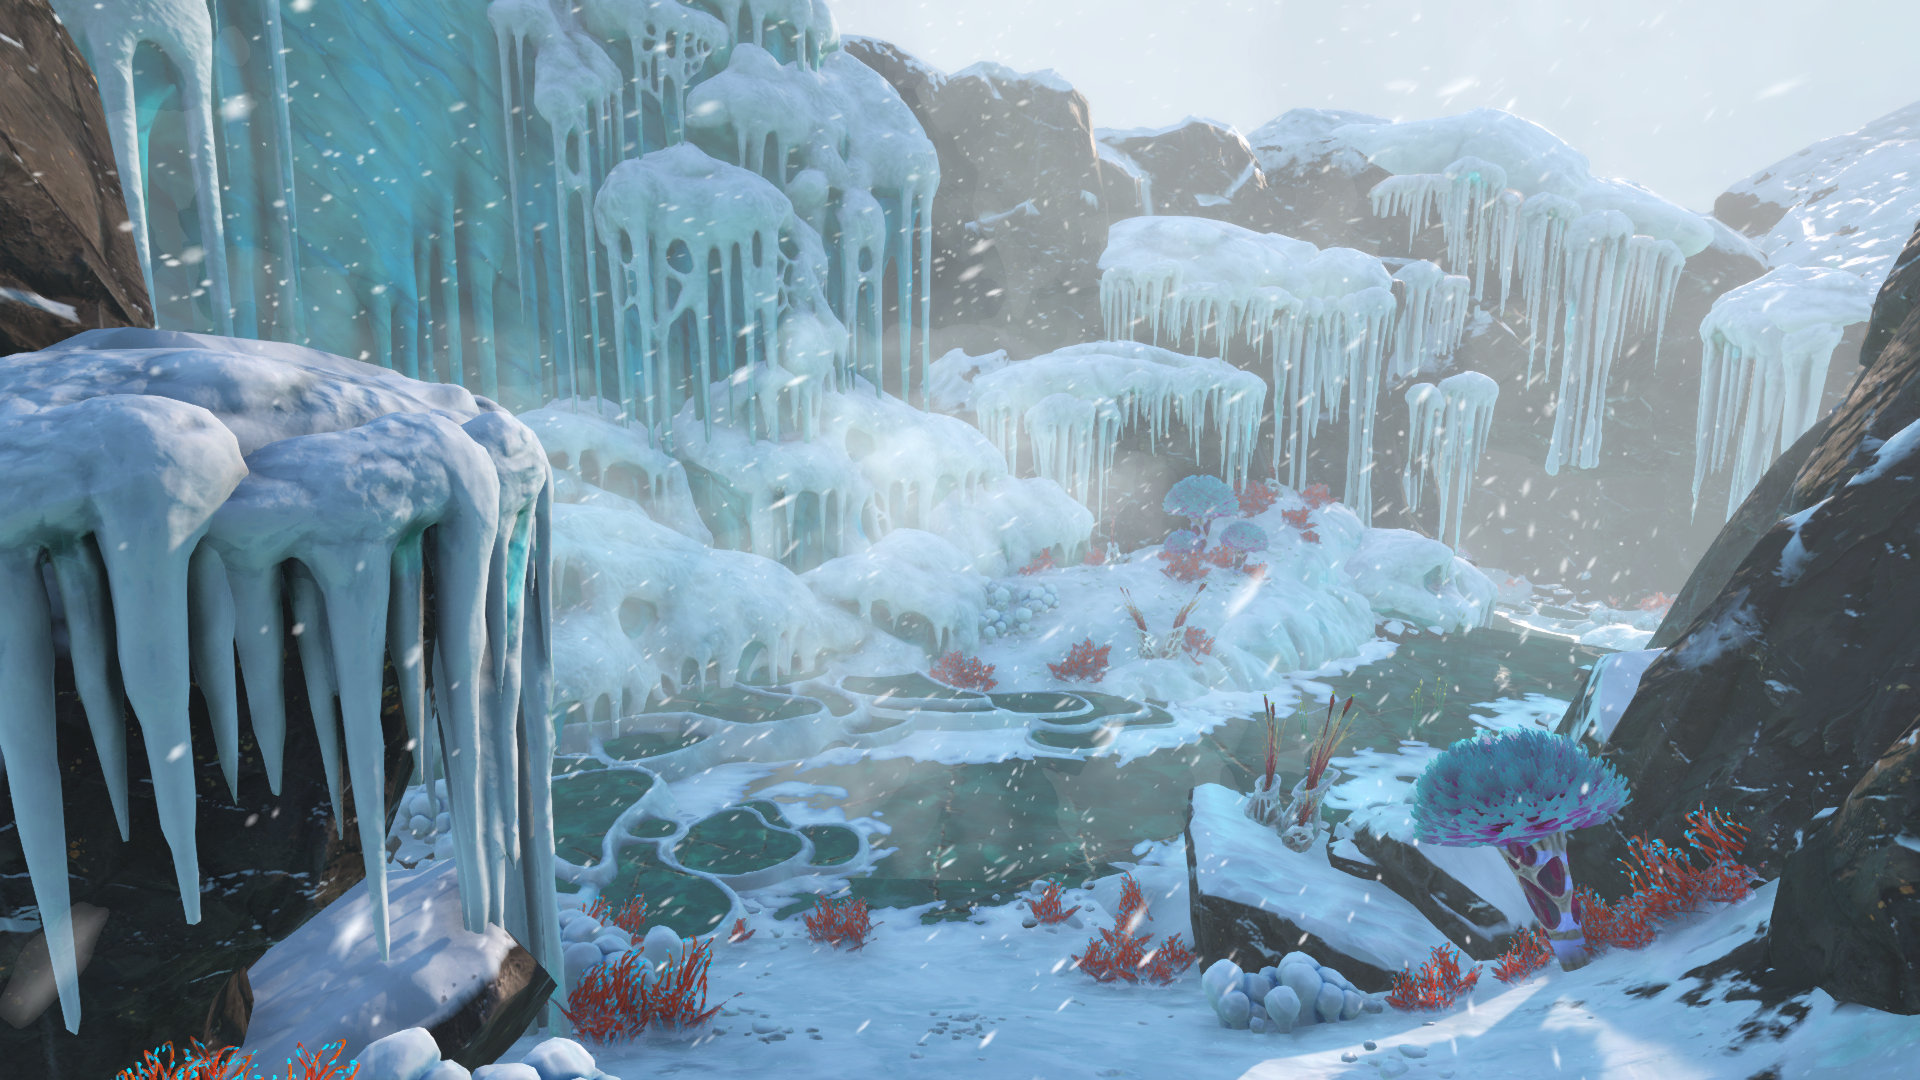 Subnautica: Below Zero – Everything You Need to Know